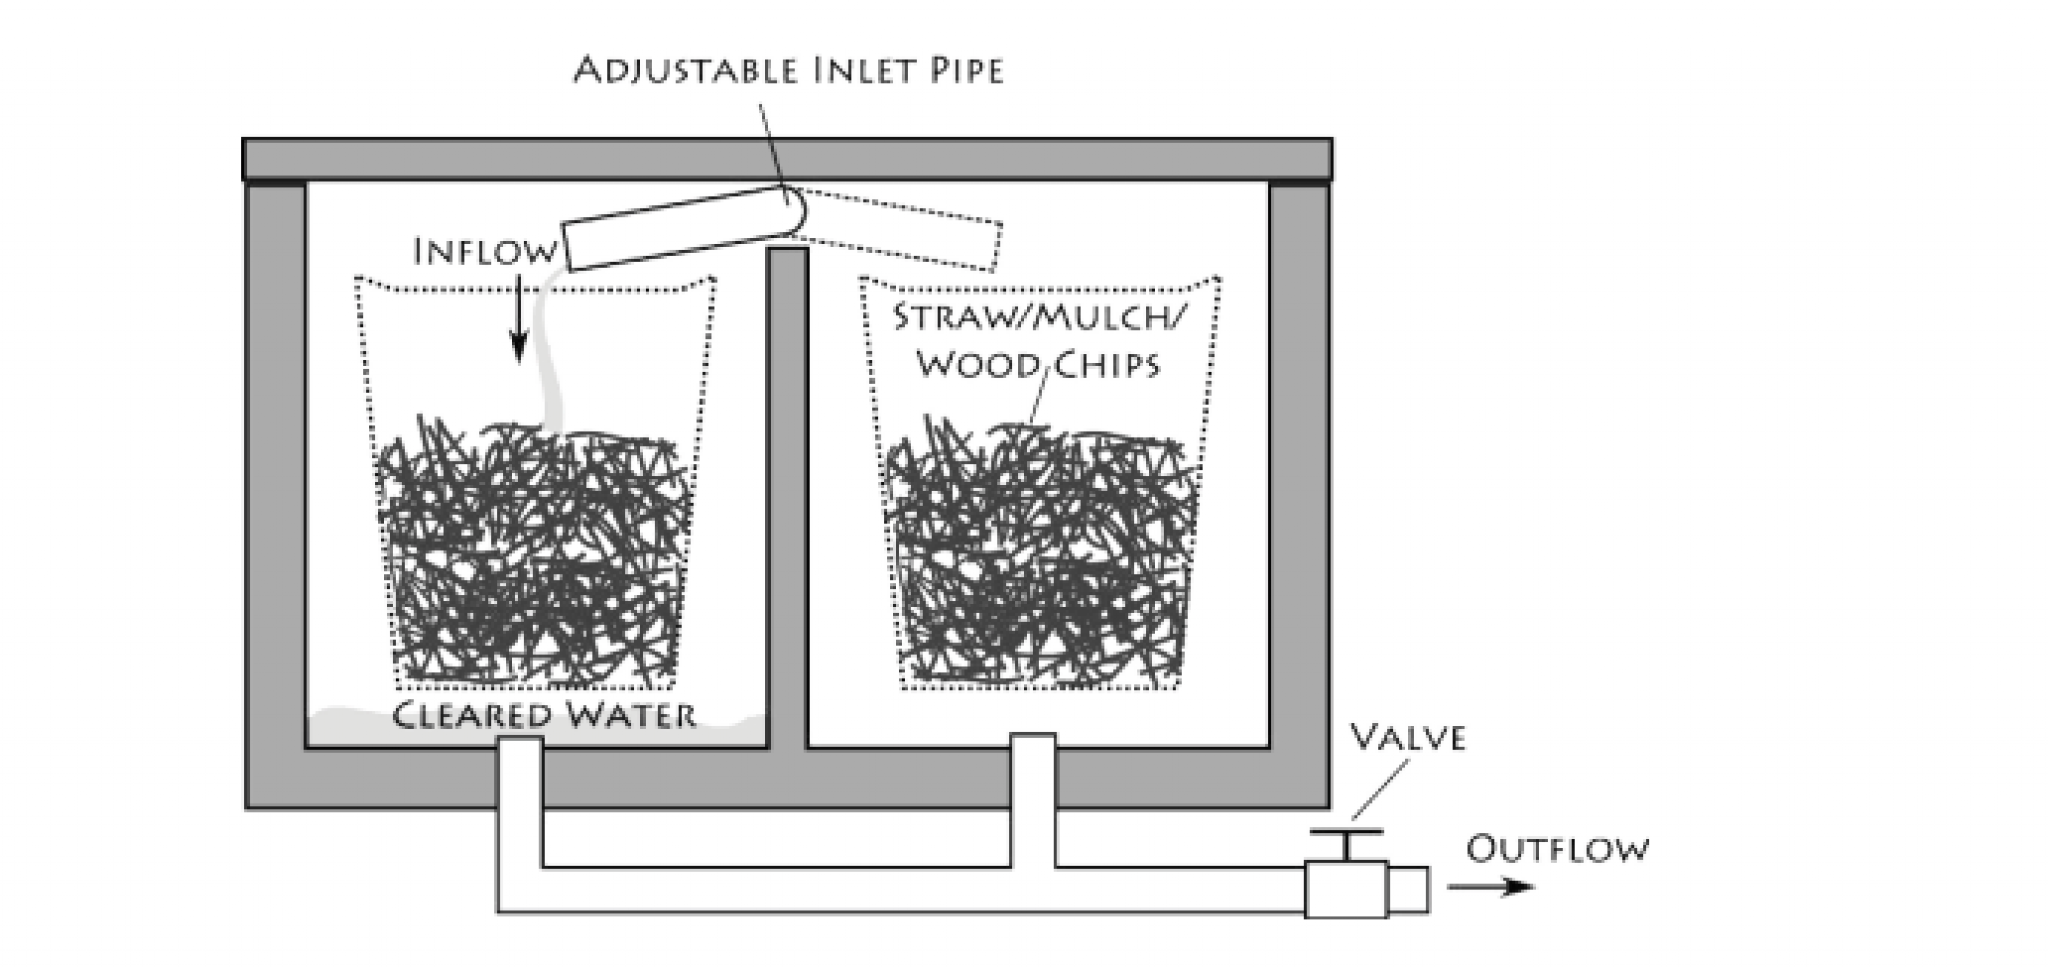 A diagram showing how biofilters work.